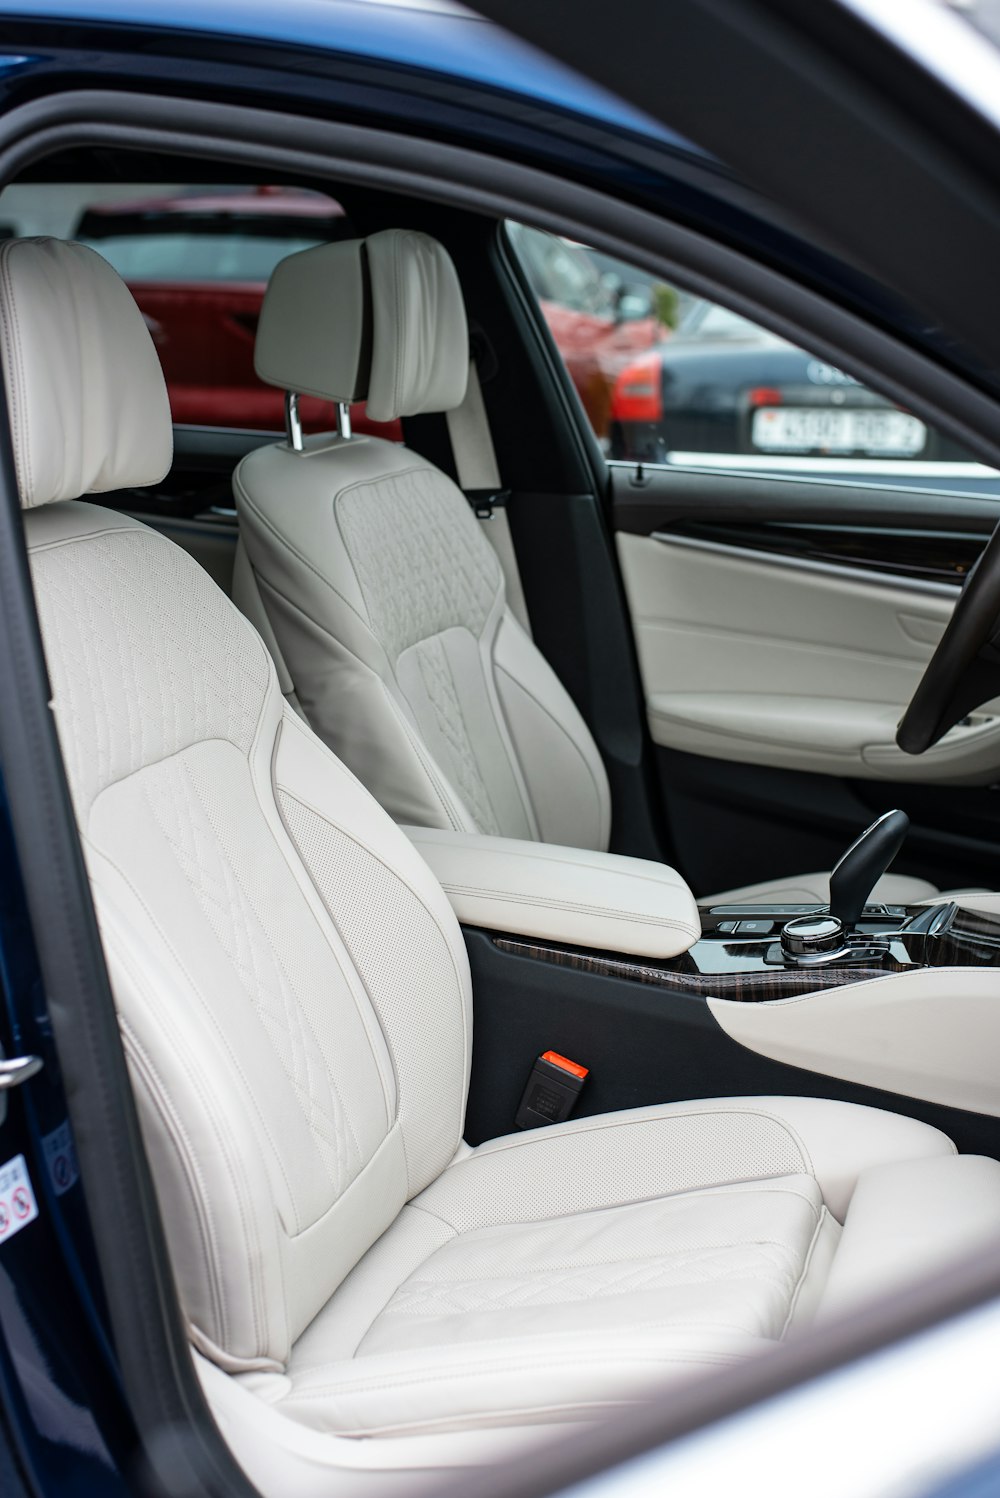 the interior of a car with white leather seats